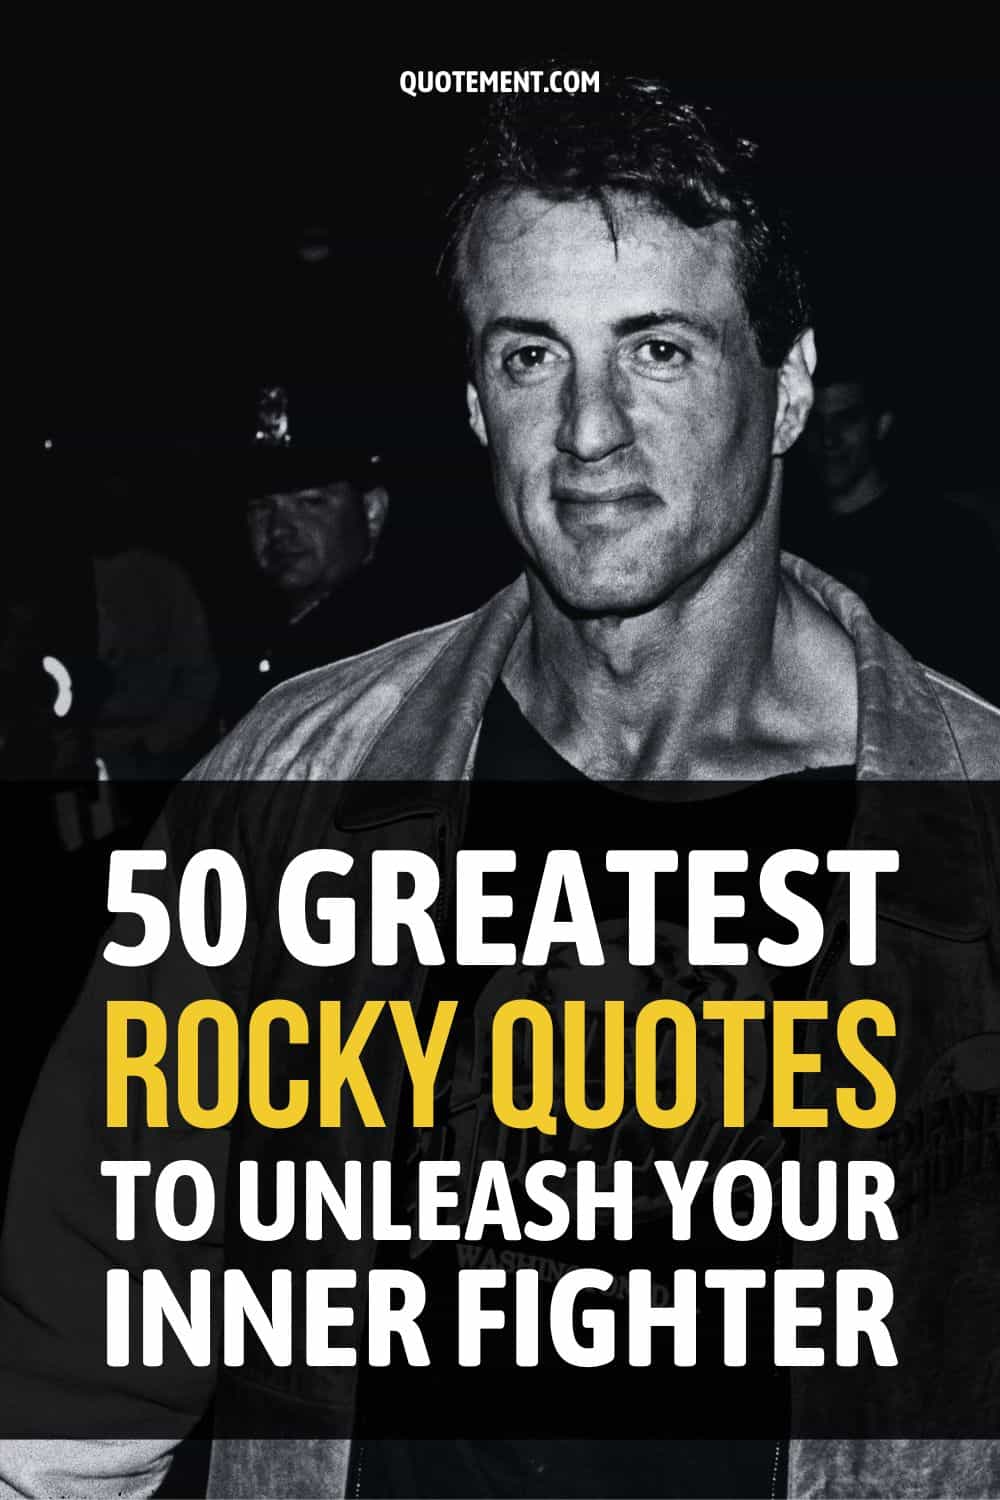 50 Greatest Rocky Quotes To Unleash Your Inner Fighter
